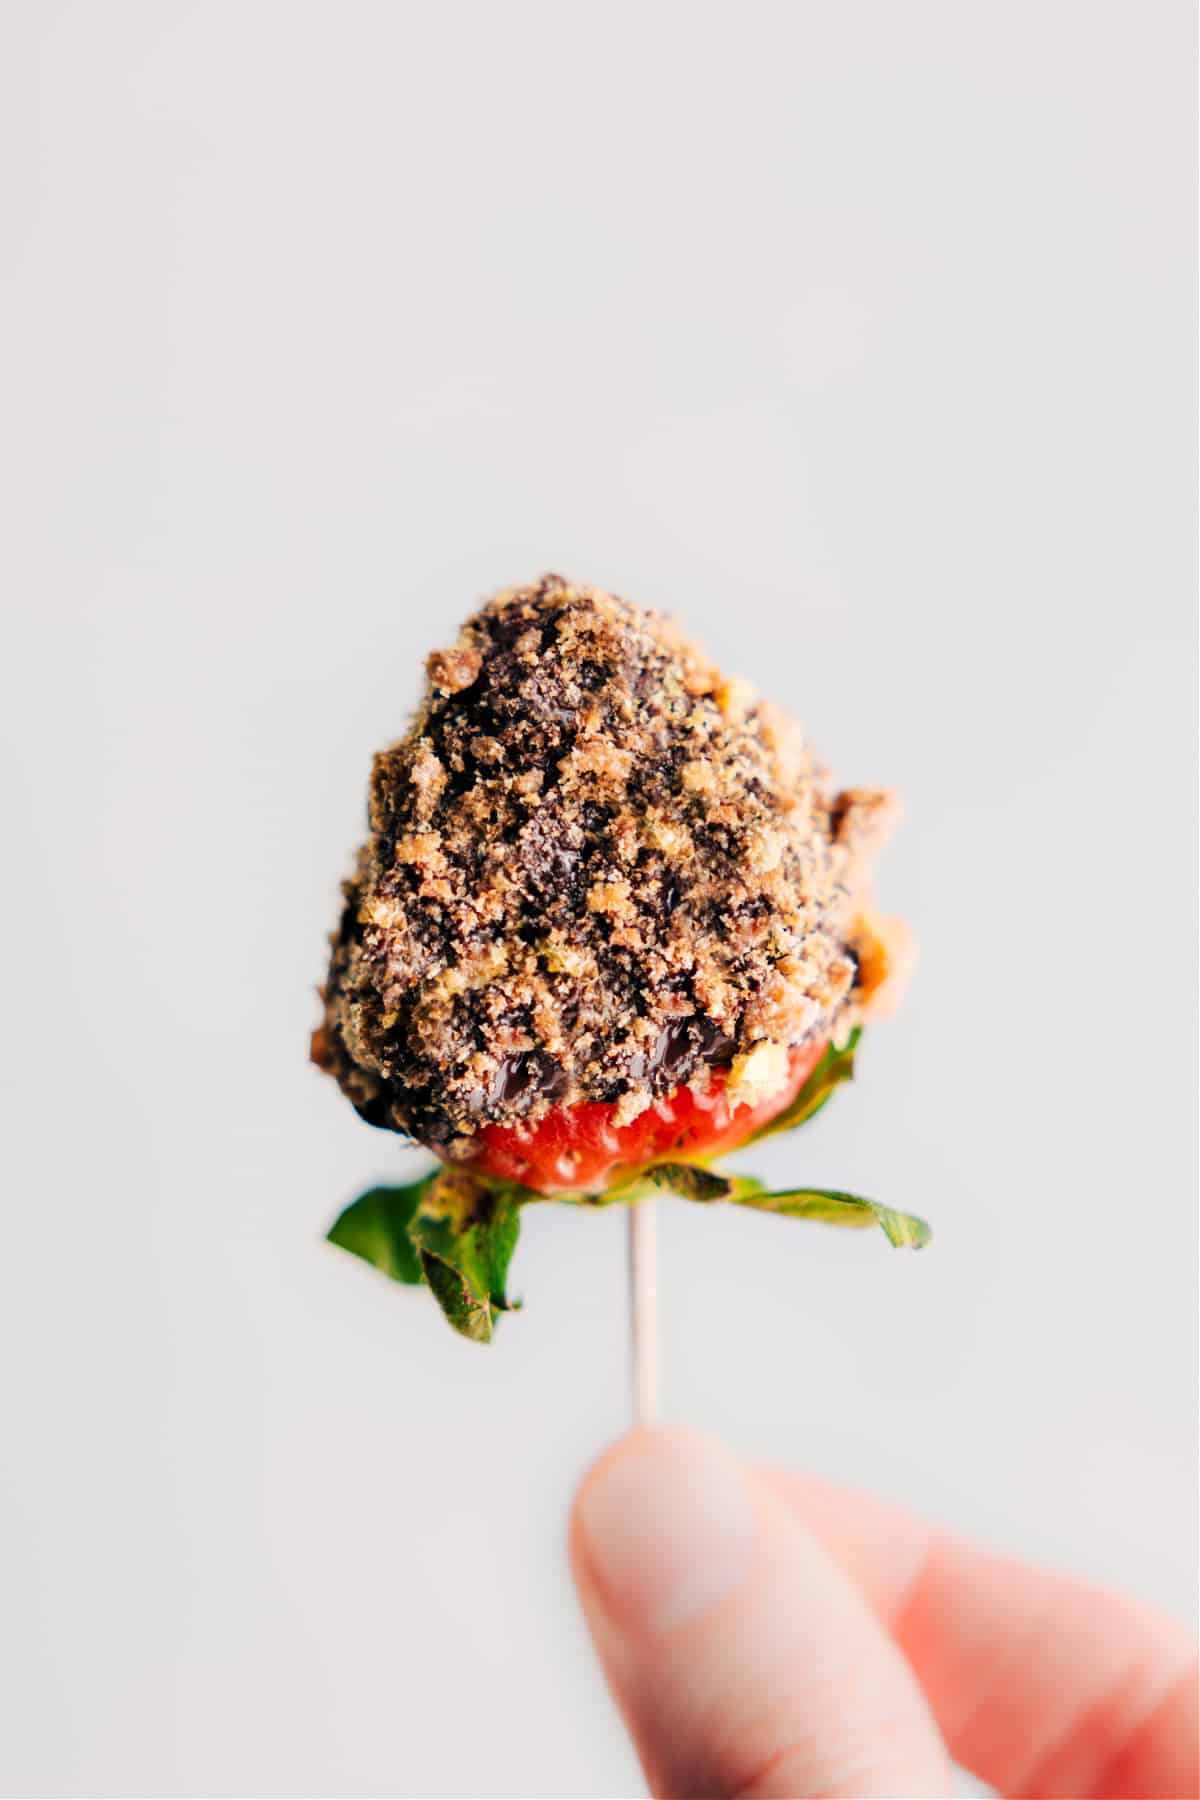 Image of a chocolate-dipped strawberry topped with cookie crumbs